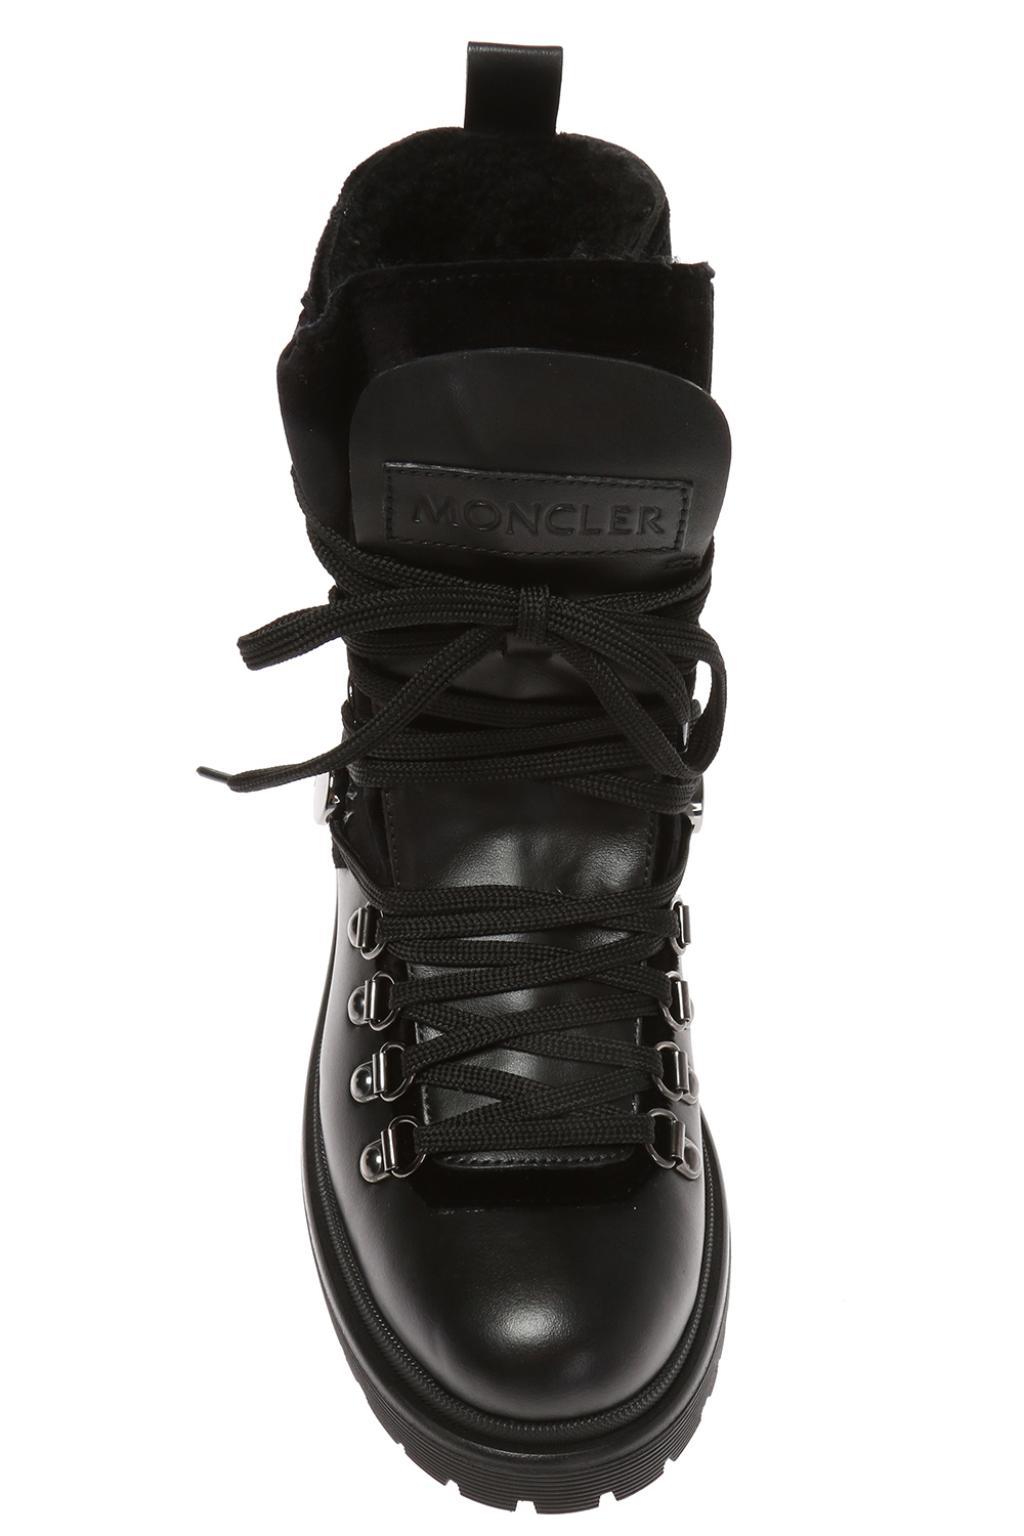 Moncler 'berenice' Padded Boots in Black | Lyst